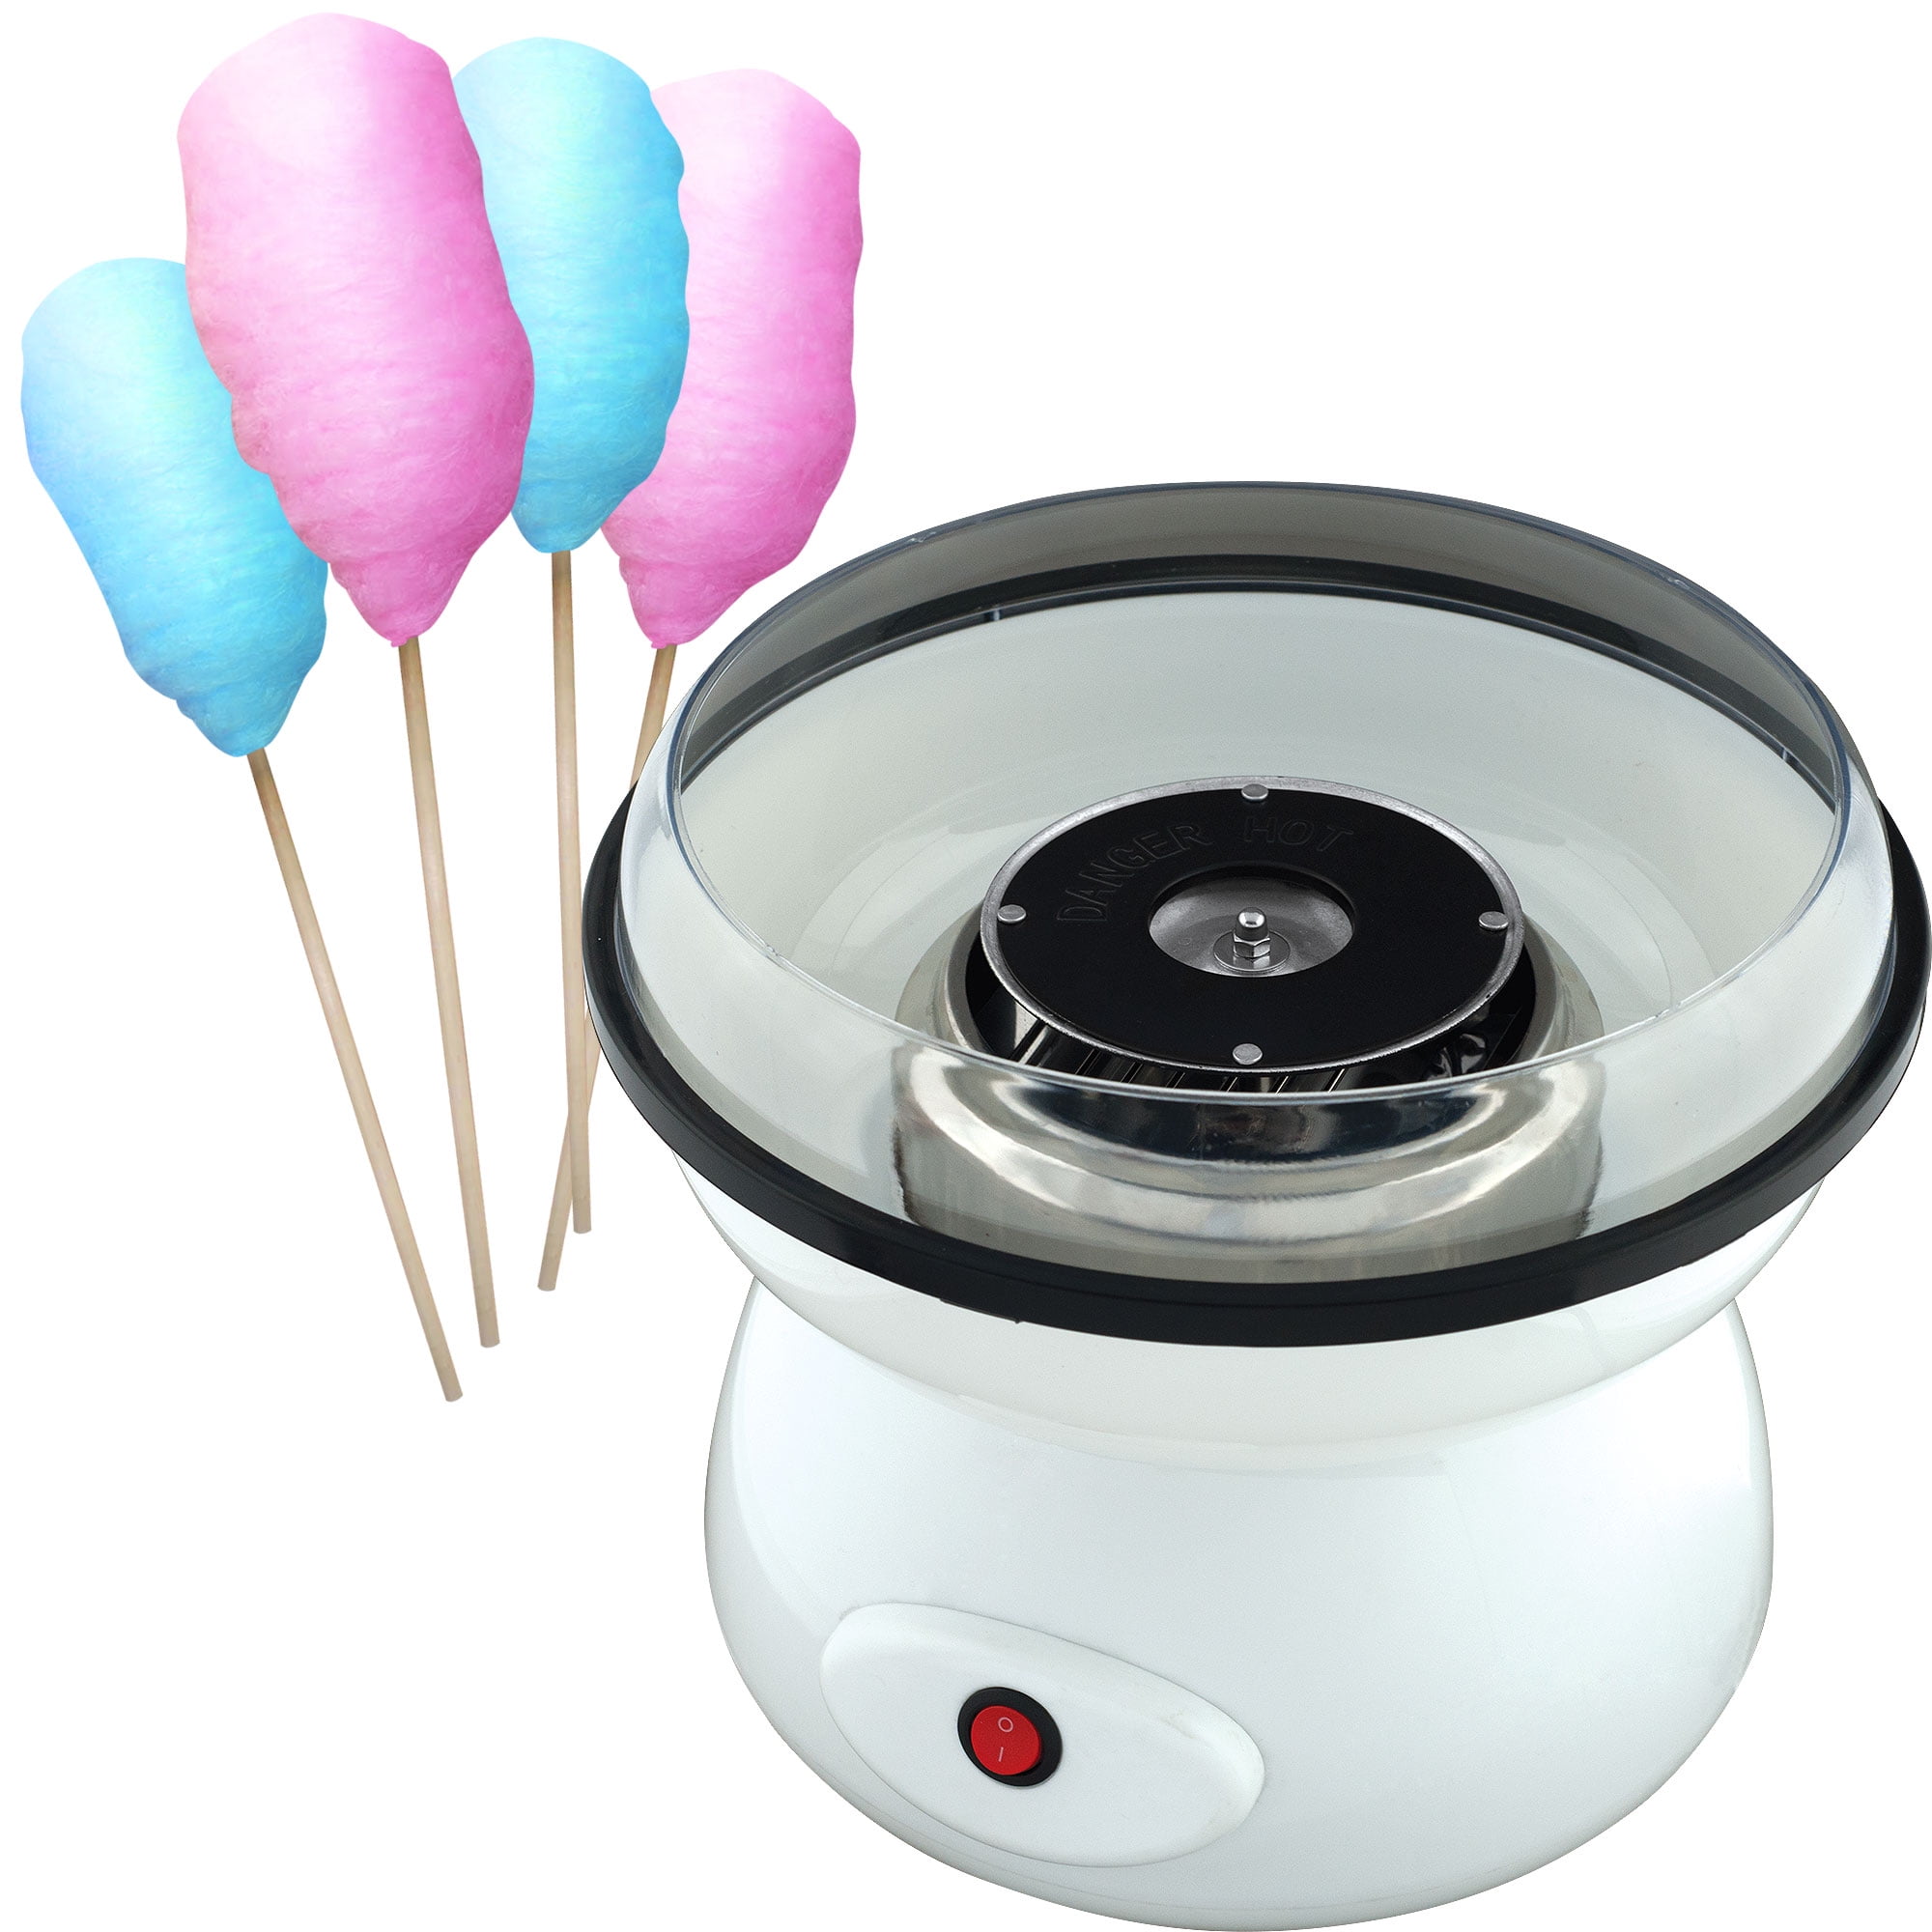 Cotton Candy Machine Commercial Maker 450W Professional Candy Floss Cotton Candy Maker for Kids 450w 